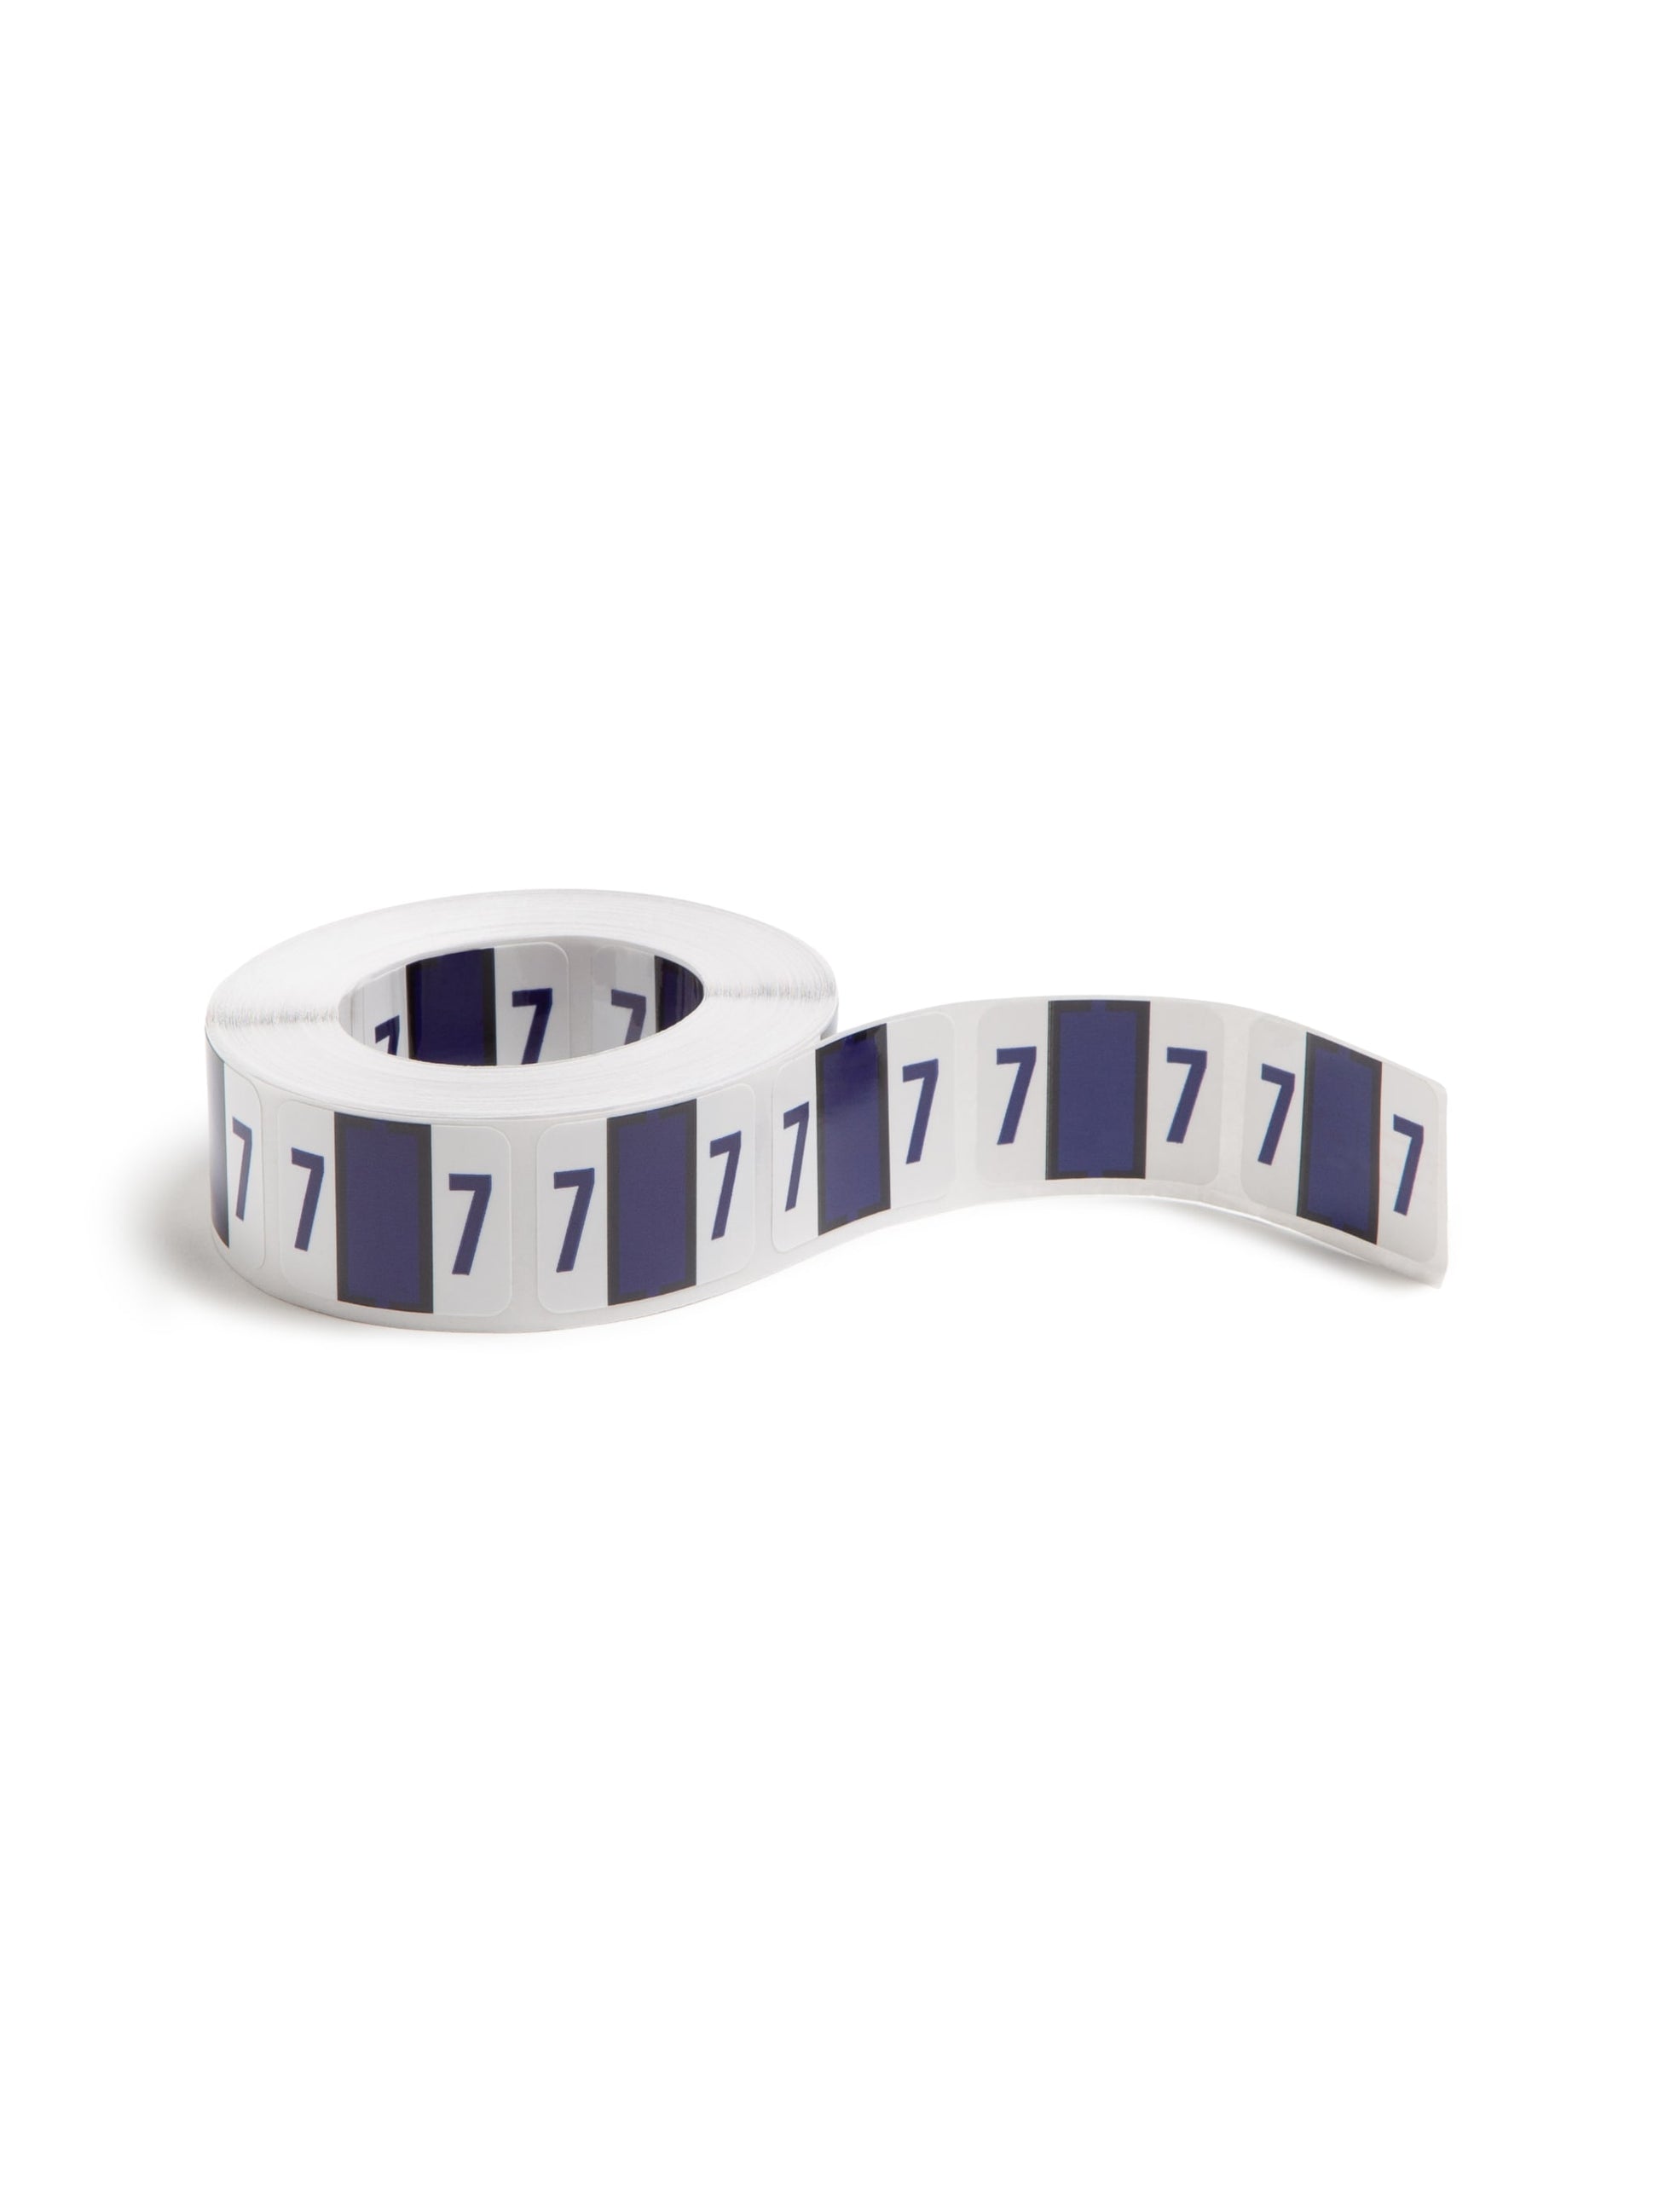 BCCRN Bar Style Color-Coded Numeric Labels, 0-9 Rolls, Purple Color, 1-1/4" X 1" Size, Set of 1, 086486673778